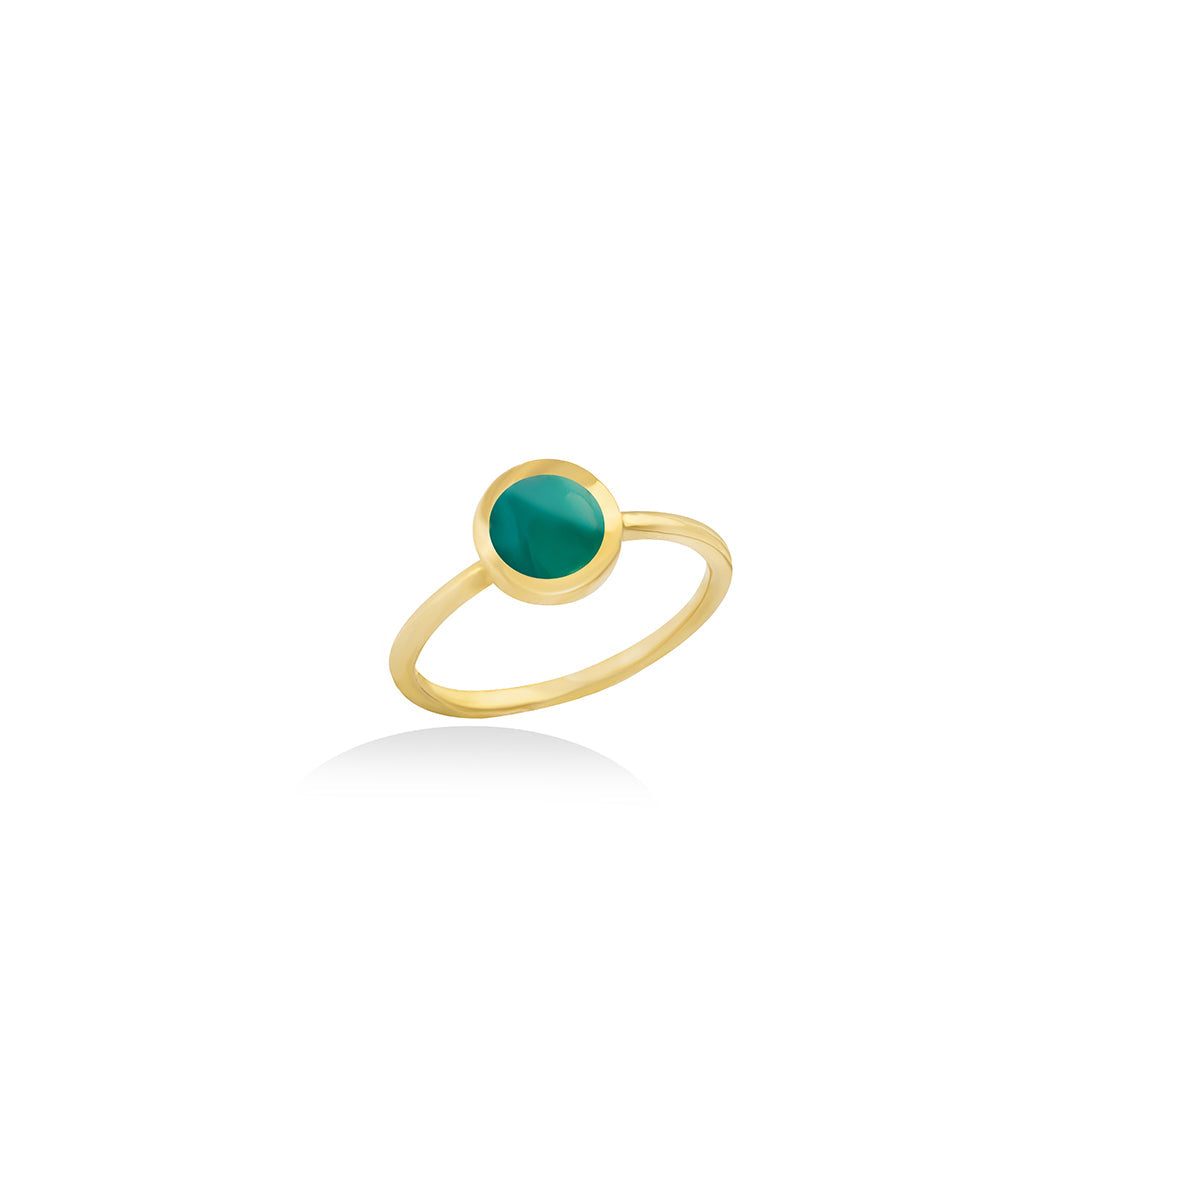 Band Ring Inlaid With Green Gem Stones Lobe In 18K Gold - Yellow Gold